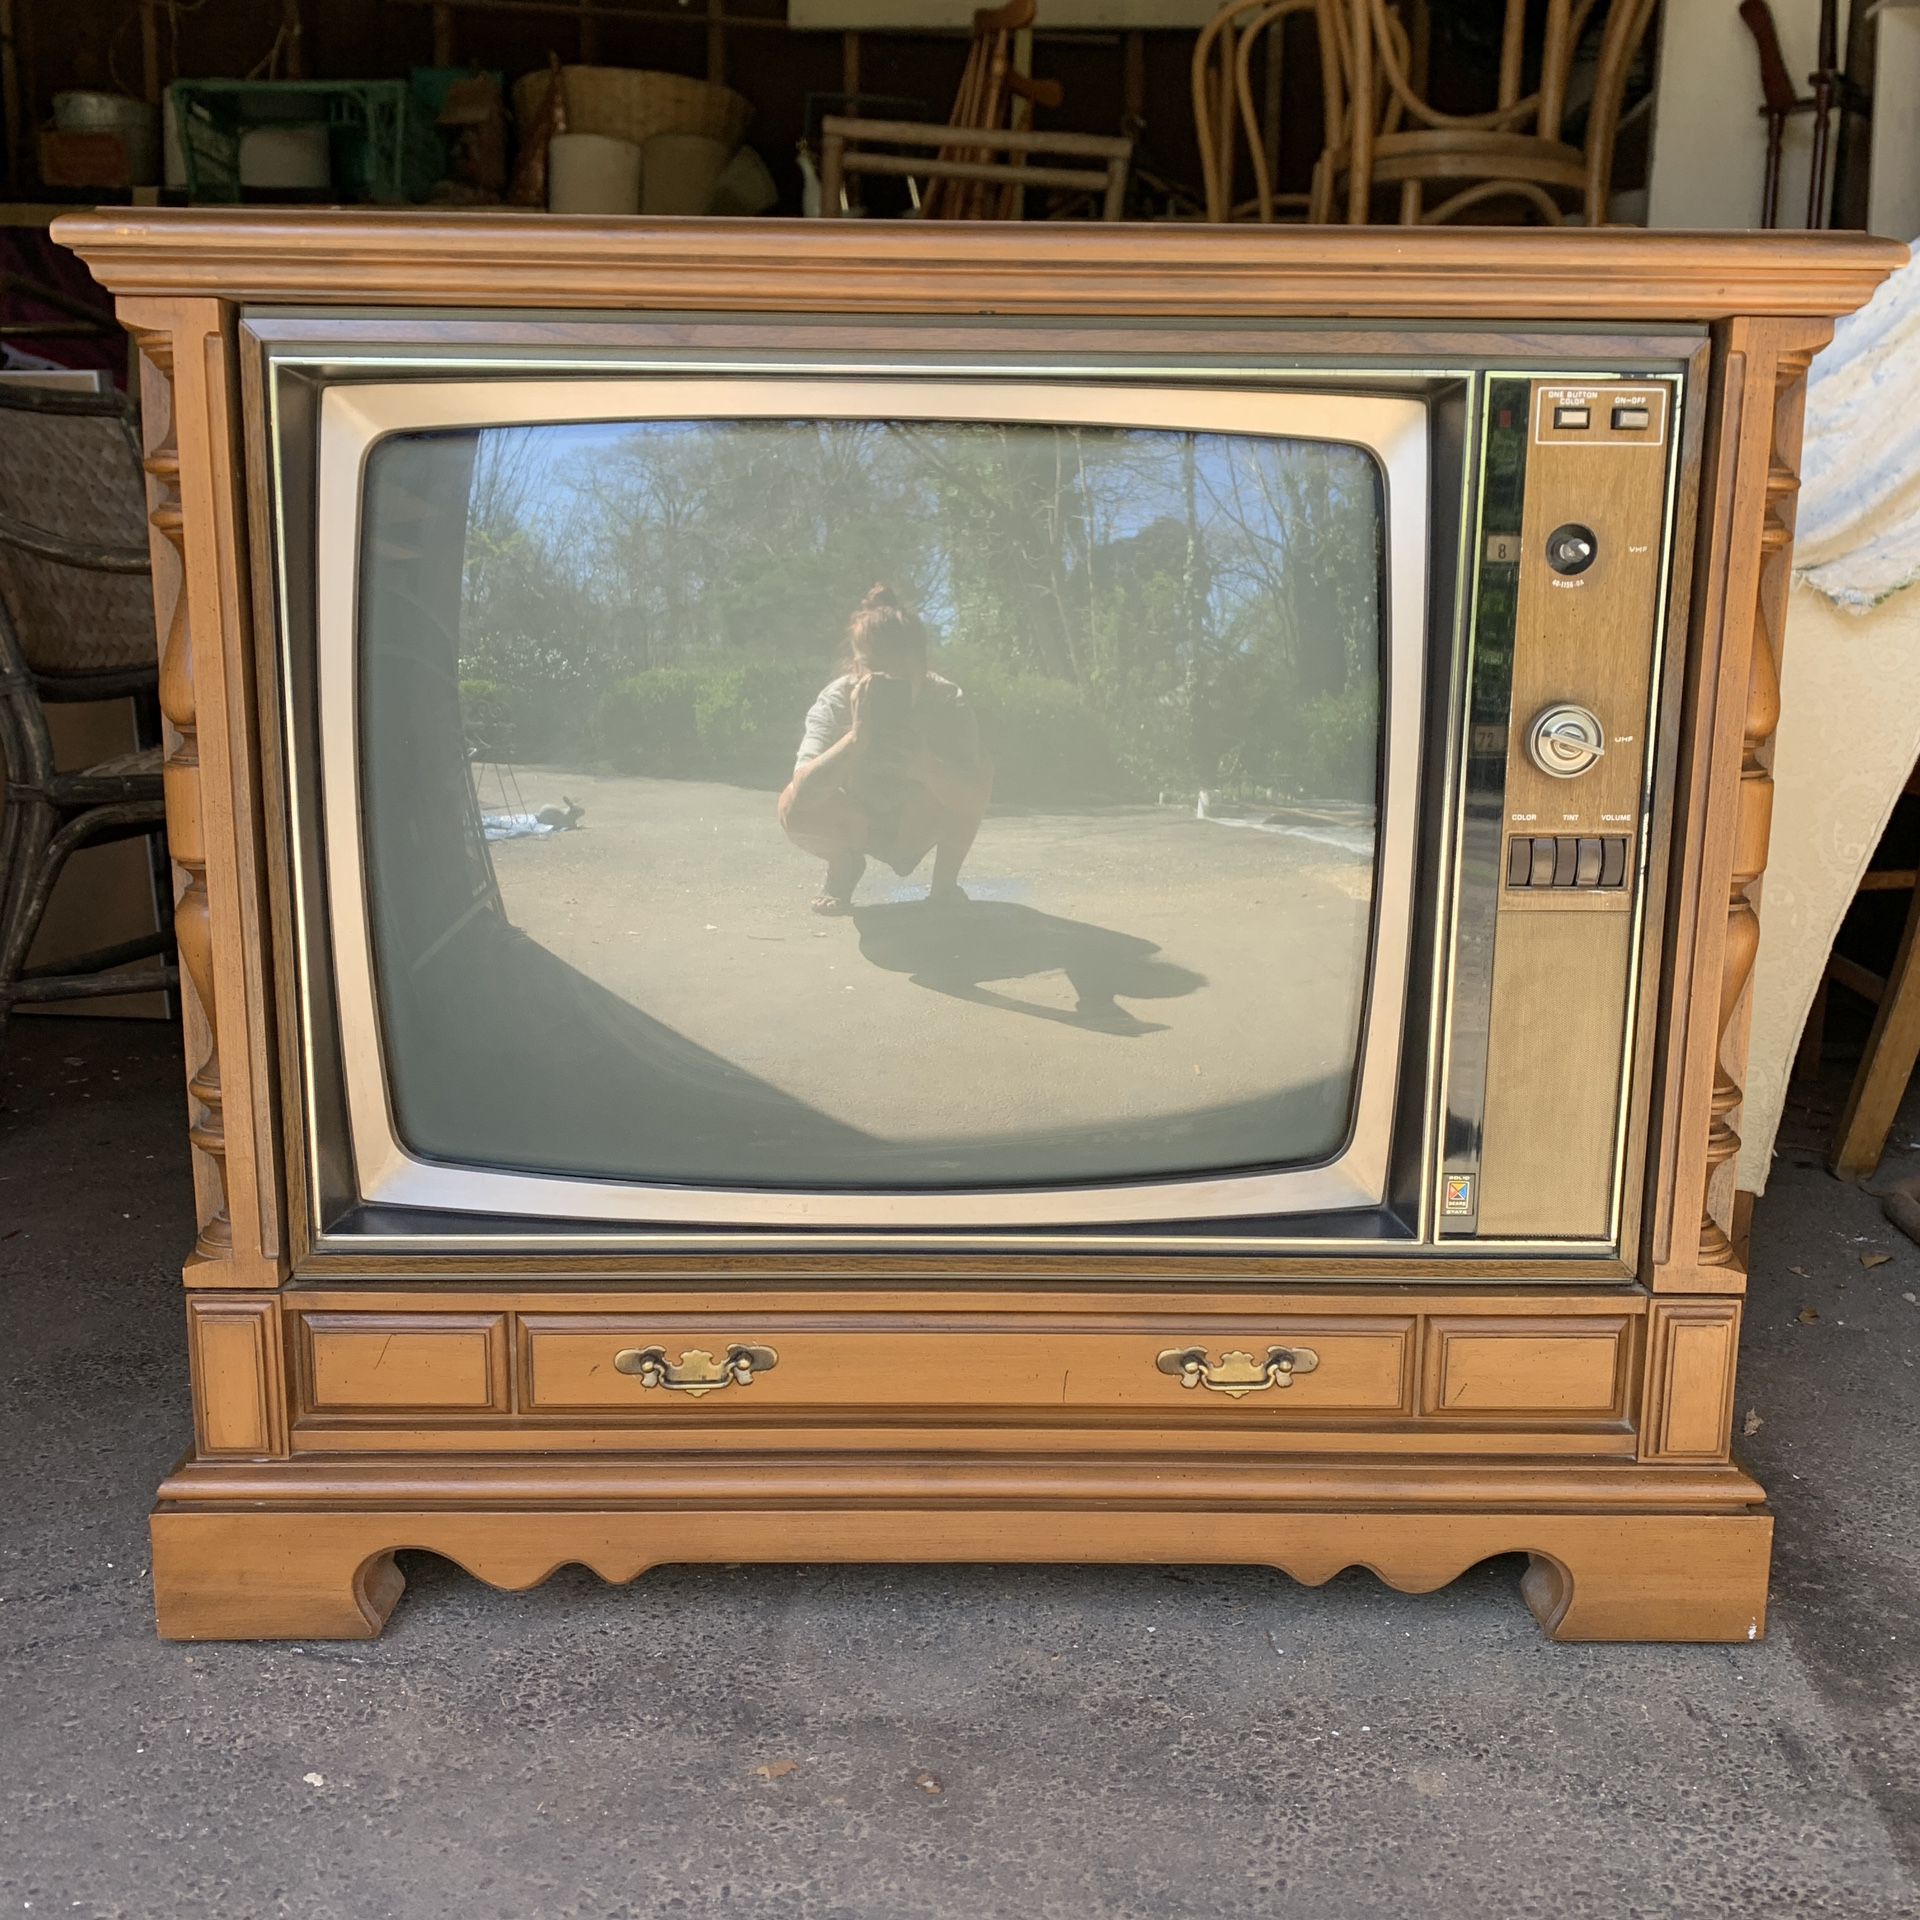 Vintage 1970s Wooden TV Cabinet - TV May Not Be Working